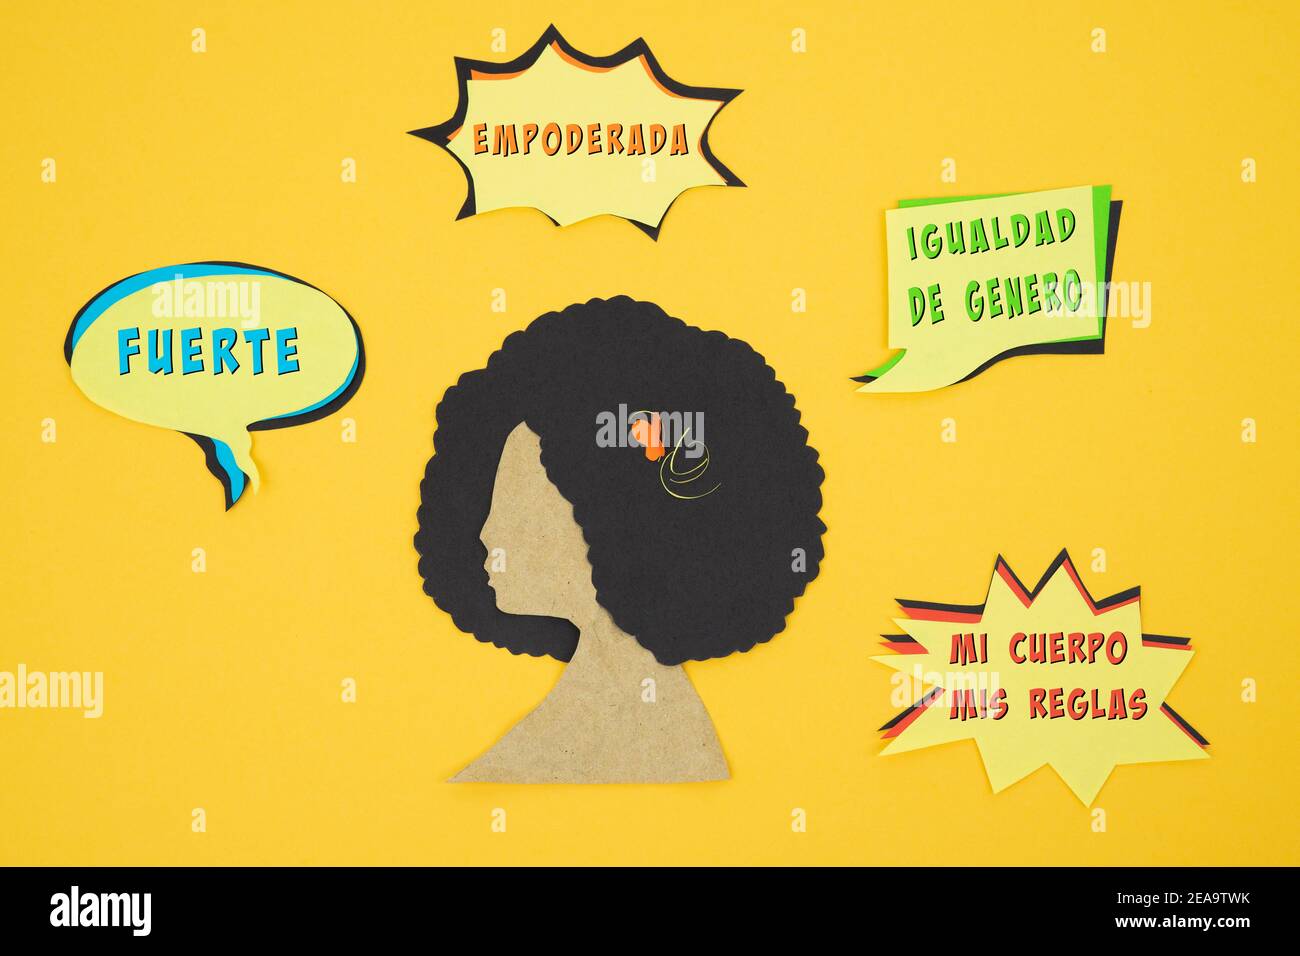 Silhouette Of Woman S Head Cut Out Of Paper With Messages In Spanish Of Female Empowerment On Yellow Background International Women S Day Stock Photo Alamy